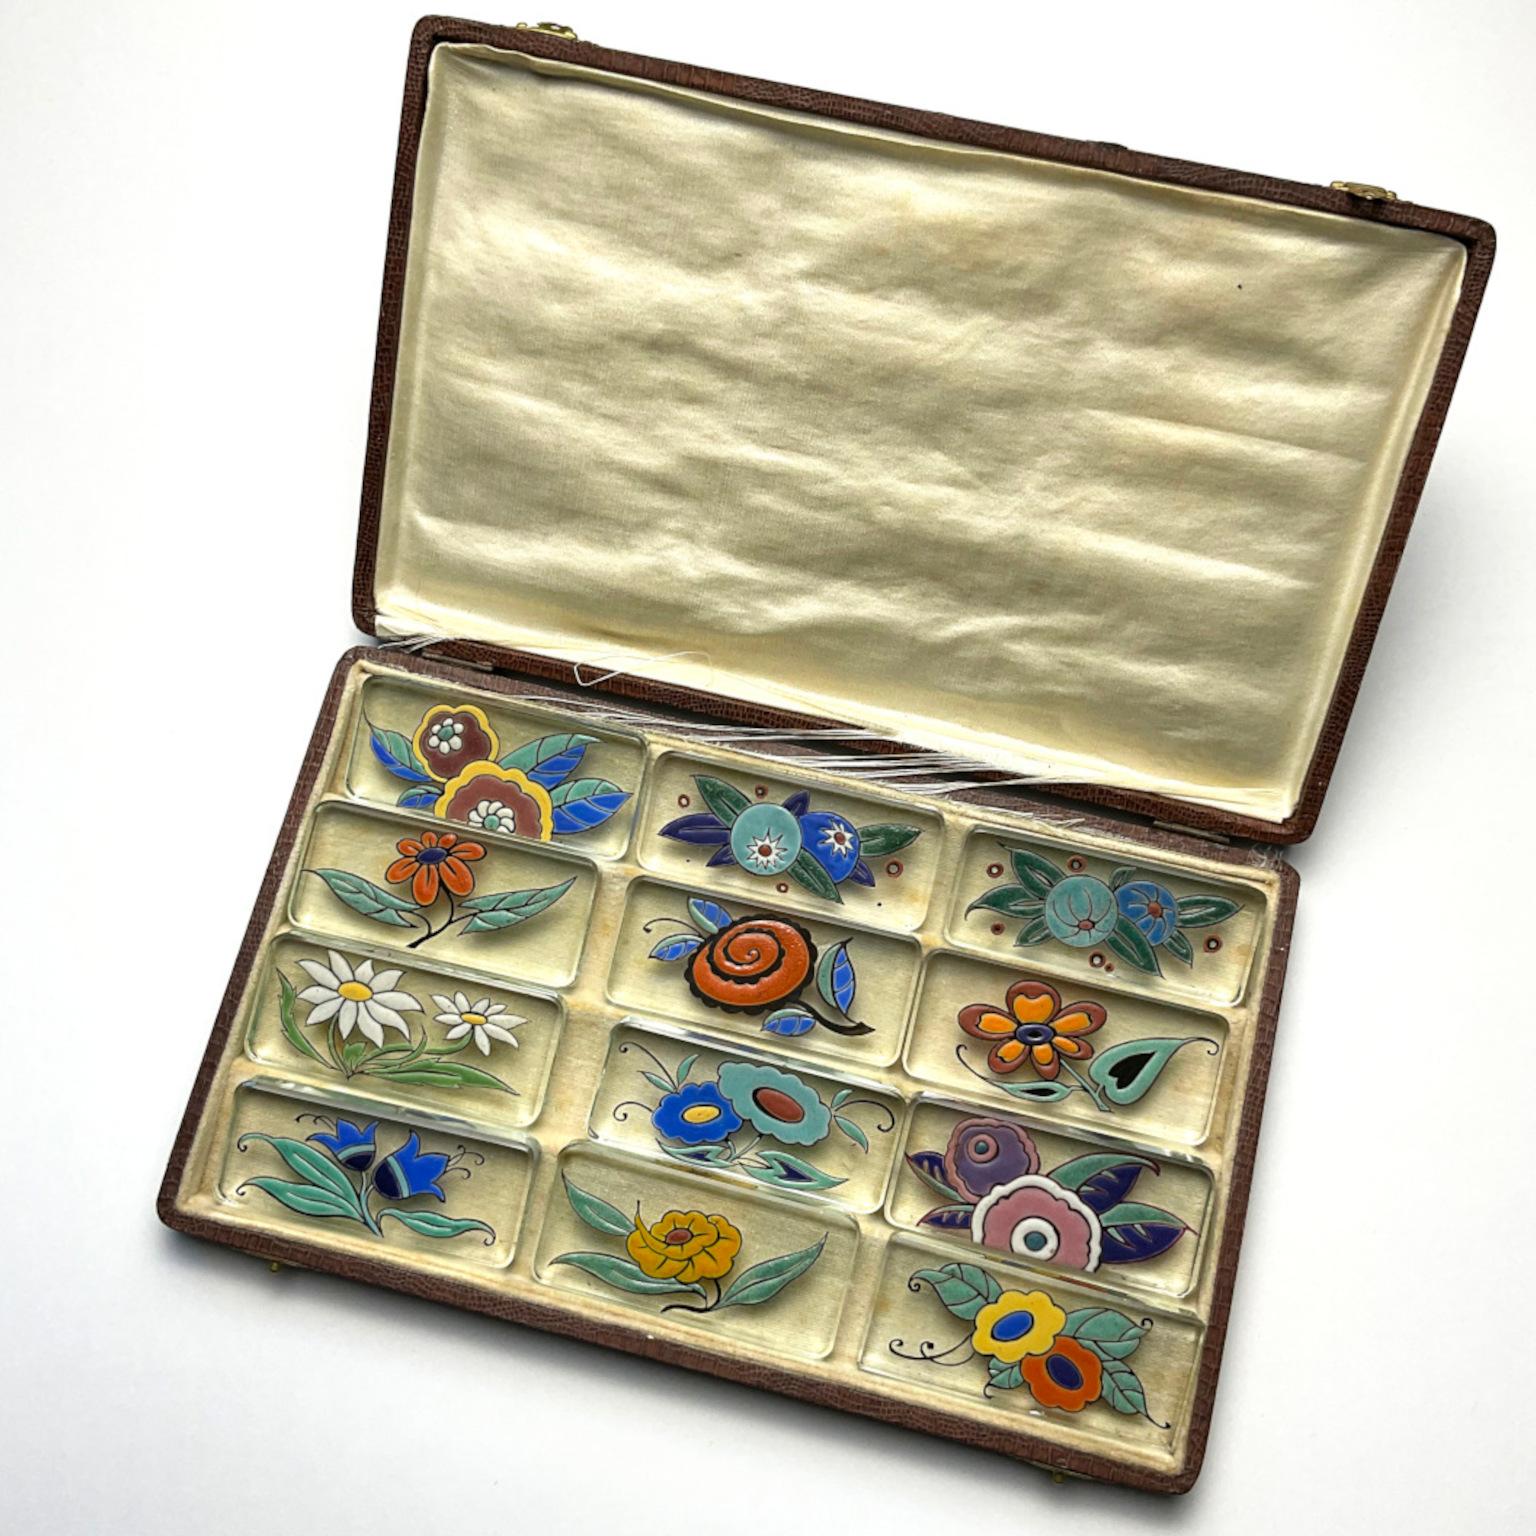 Original box of 12 beautiful c1925 enameled glass knife rests by Maison Delvaux with Polychrome Flower Decoration.
Unsigned
DELVAUX was a prestigious porcelain and crystal retail store, located at 18 rue Royale in Paris. Founded in the 1880s, it